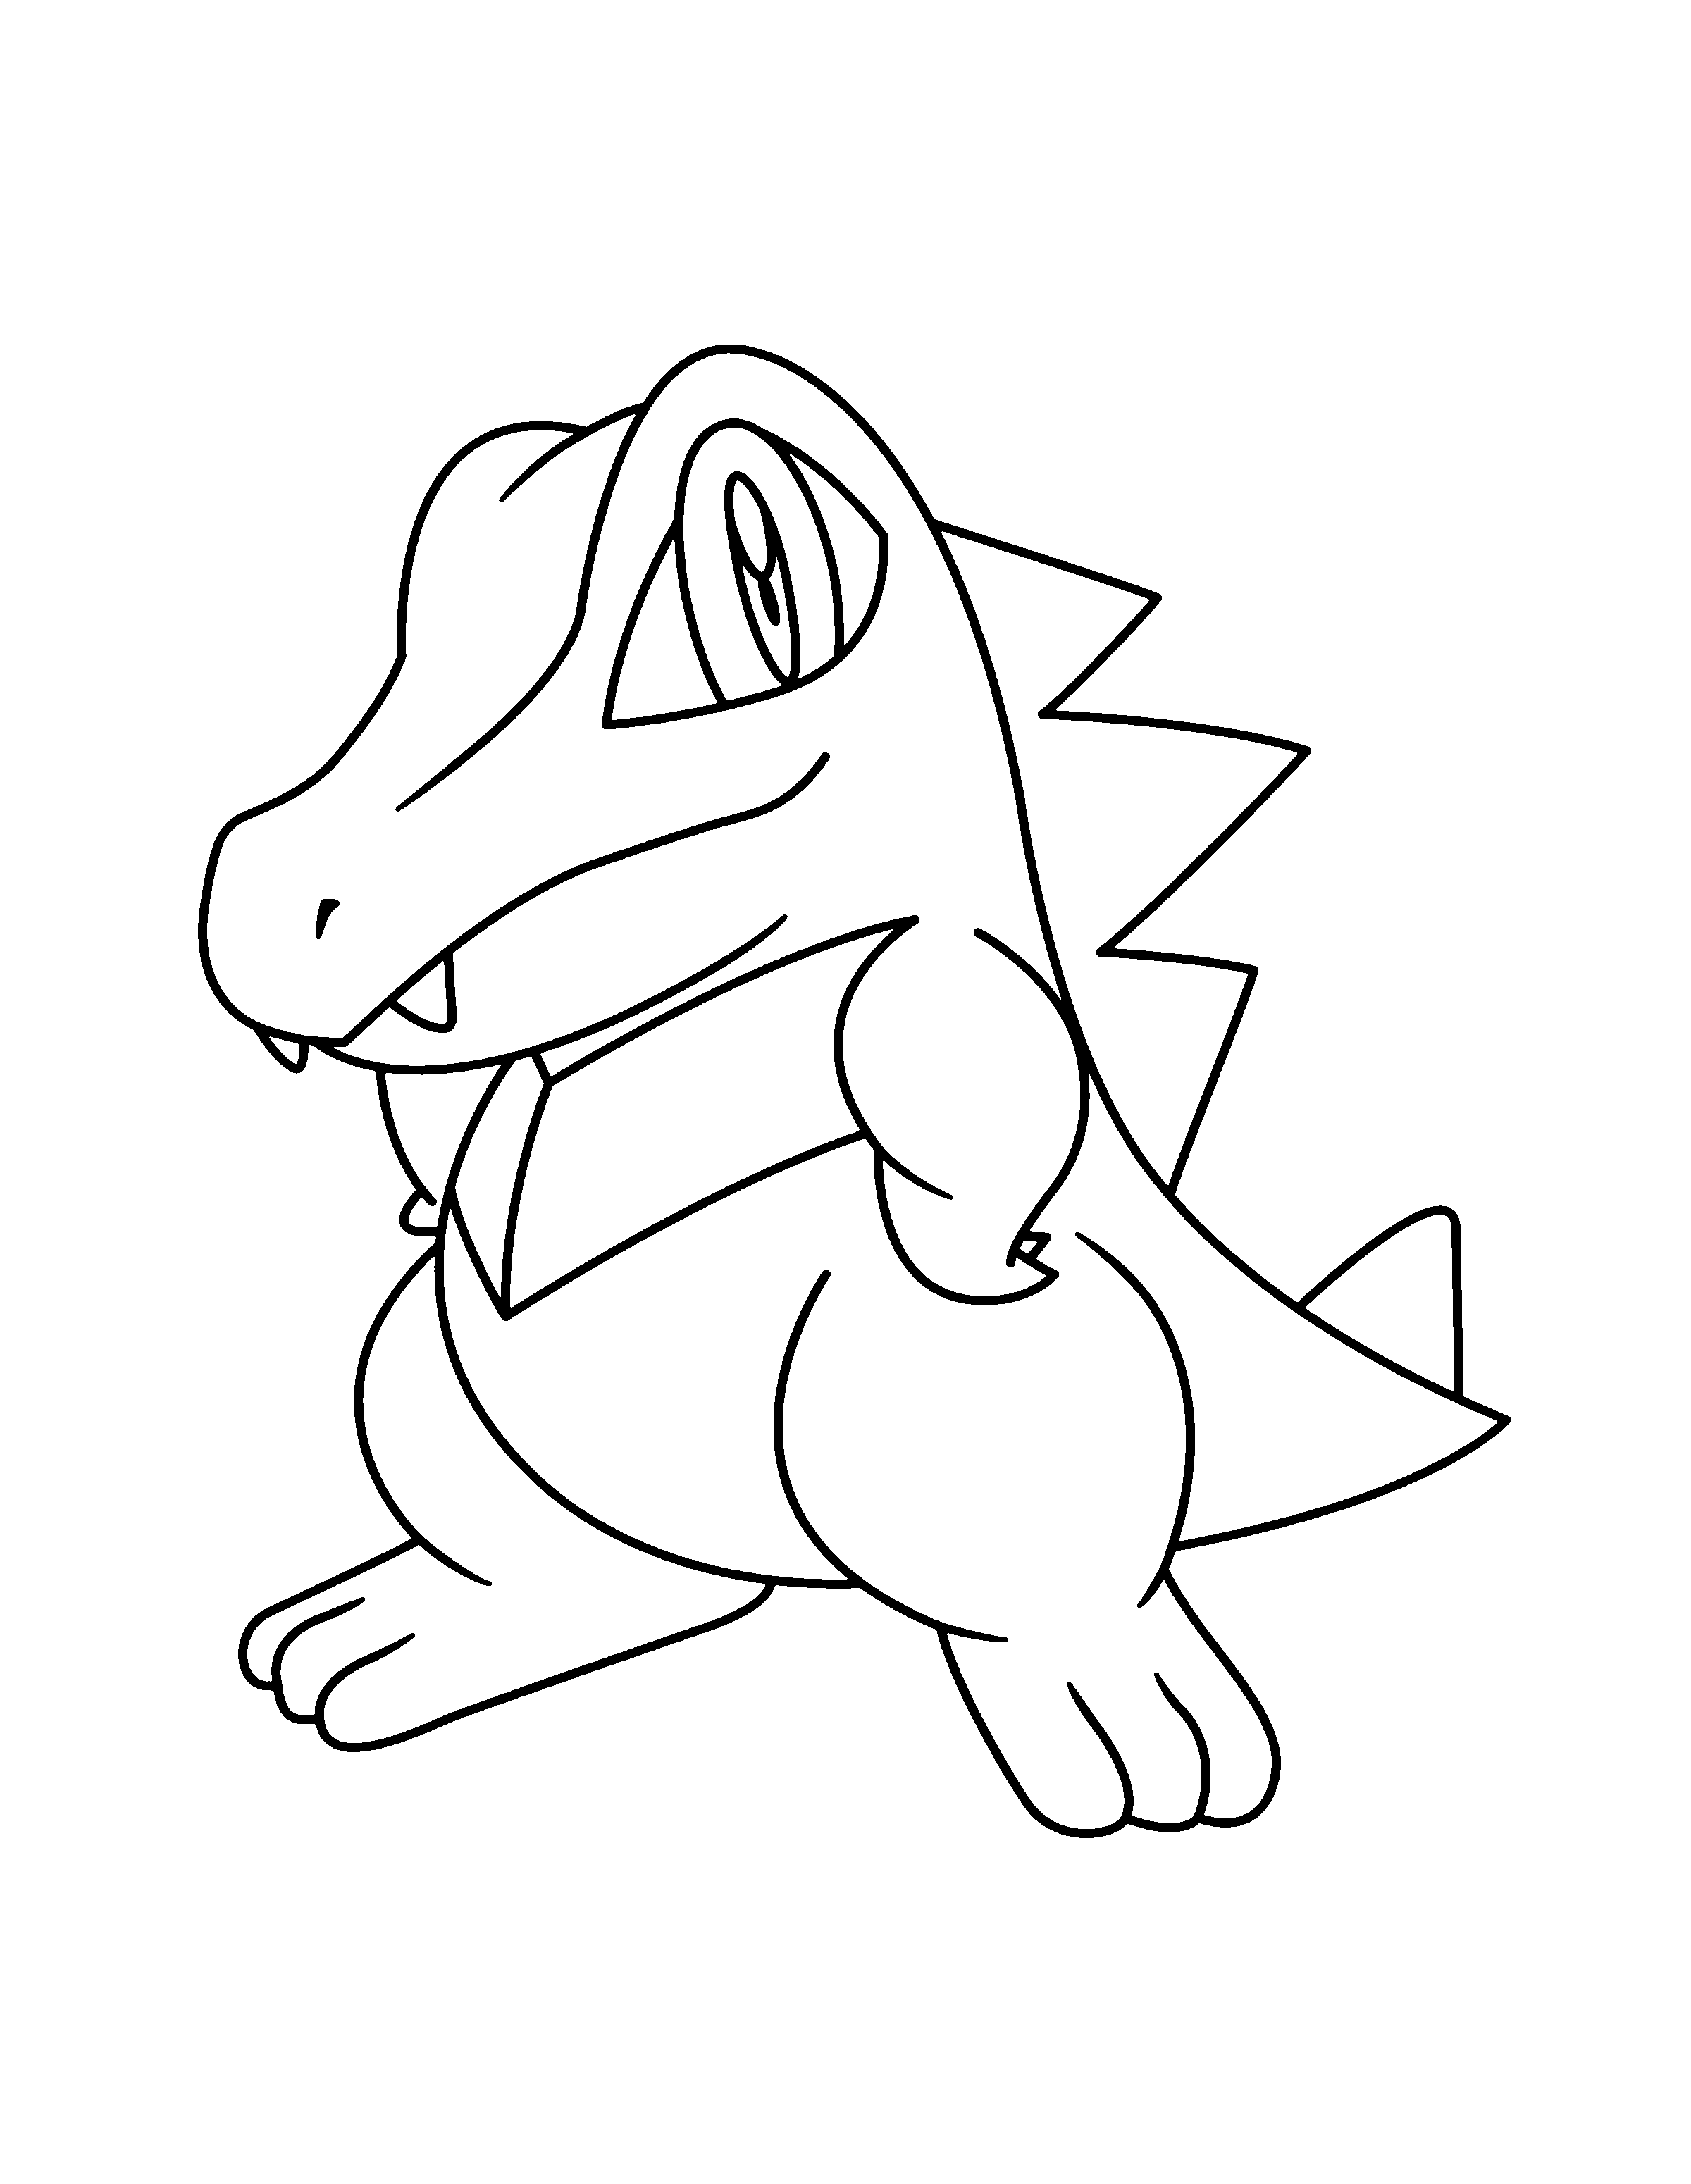 Totodile coloring page - Free Coloring Library